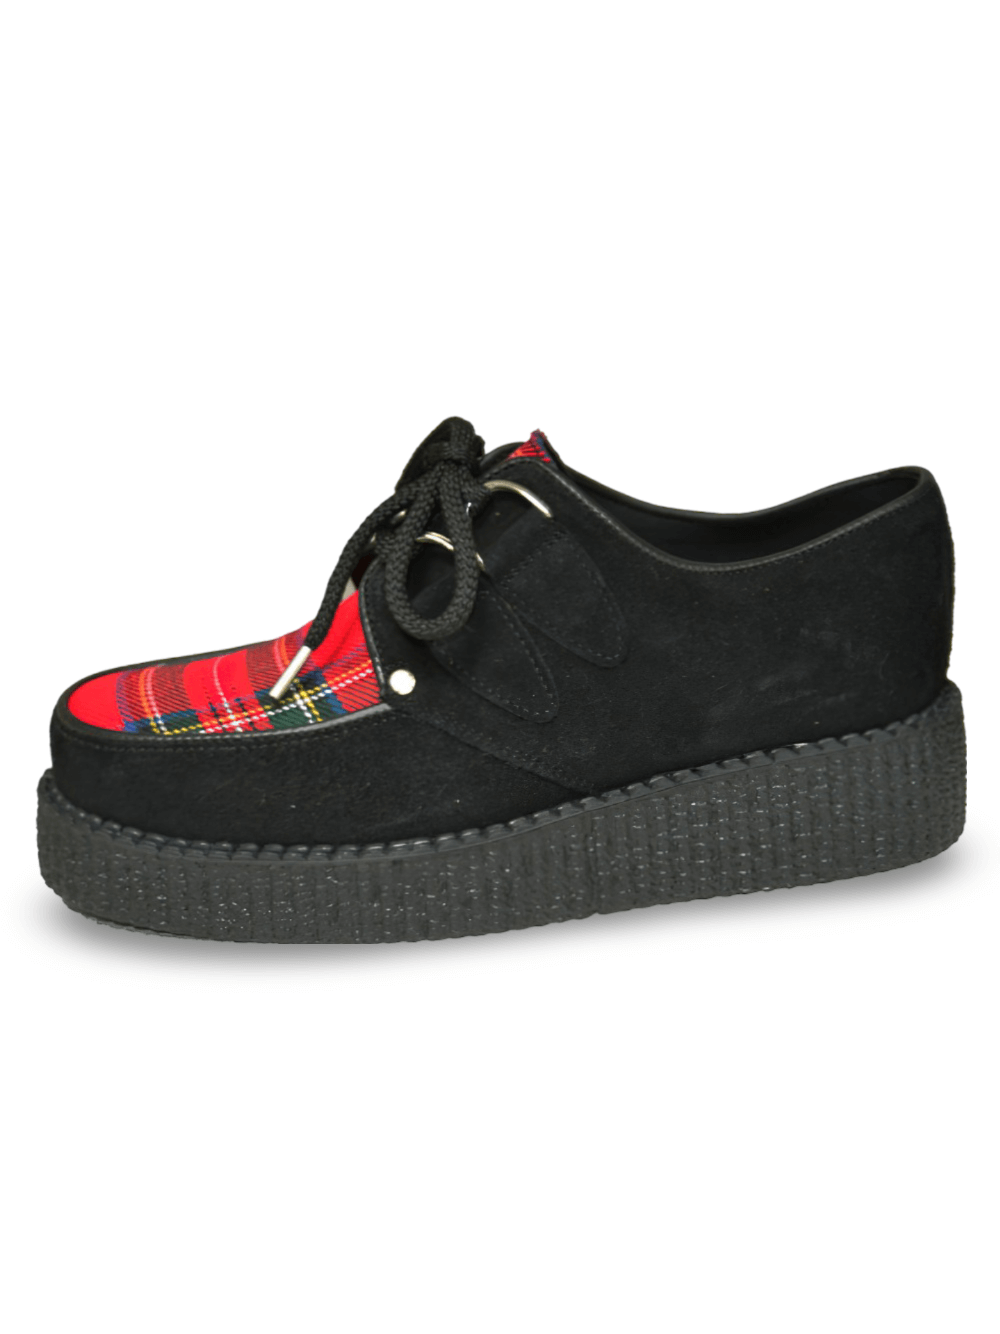 Trendy Red And Black Tartan Fabric Creepers Unisex